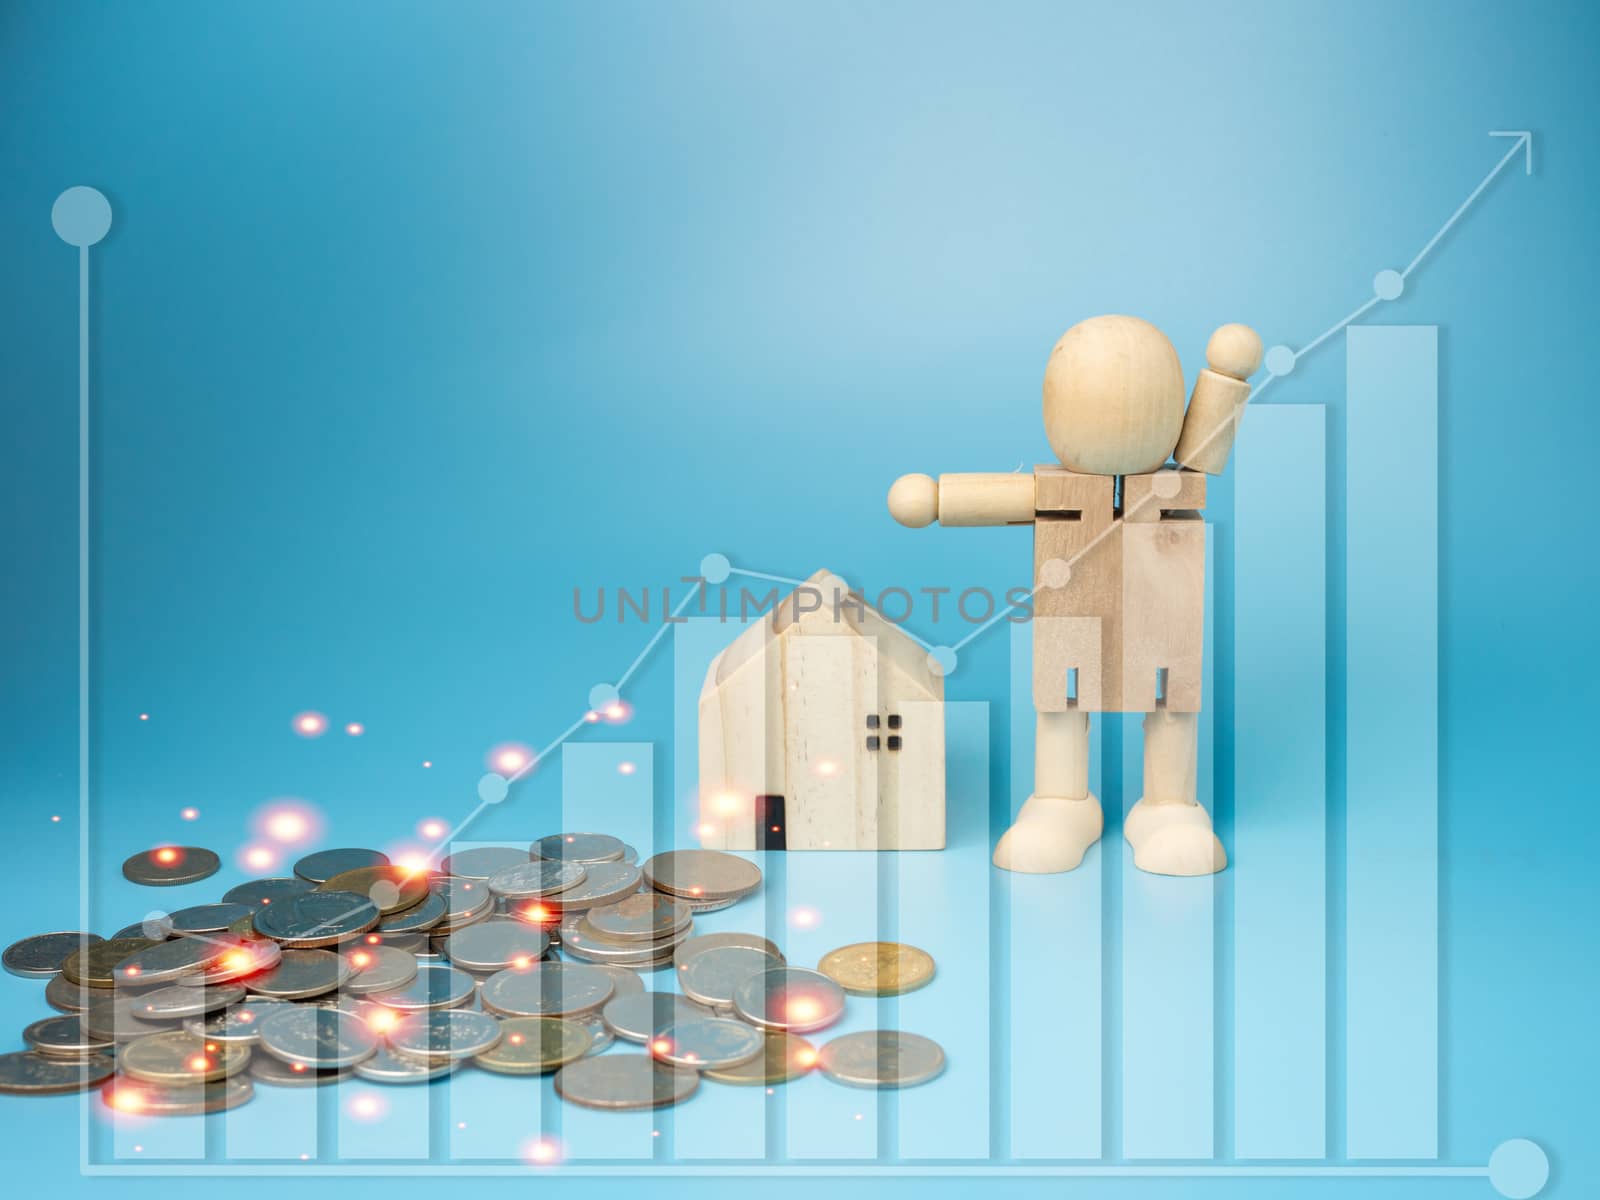 Model wooden houses and wooden dolls Stand by the pile of money With a financial graph in the foreground on a blue background. by Unimages2527